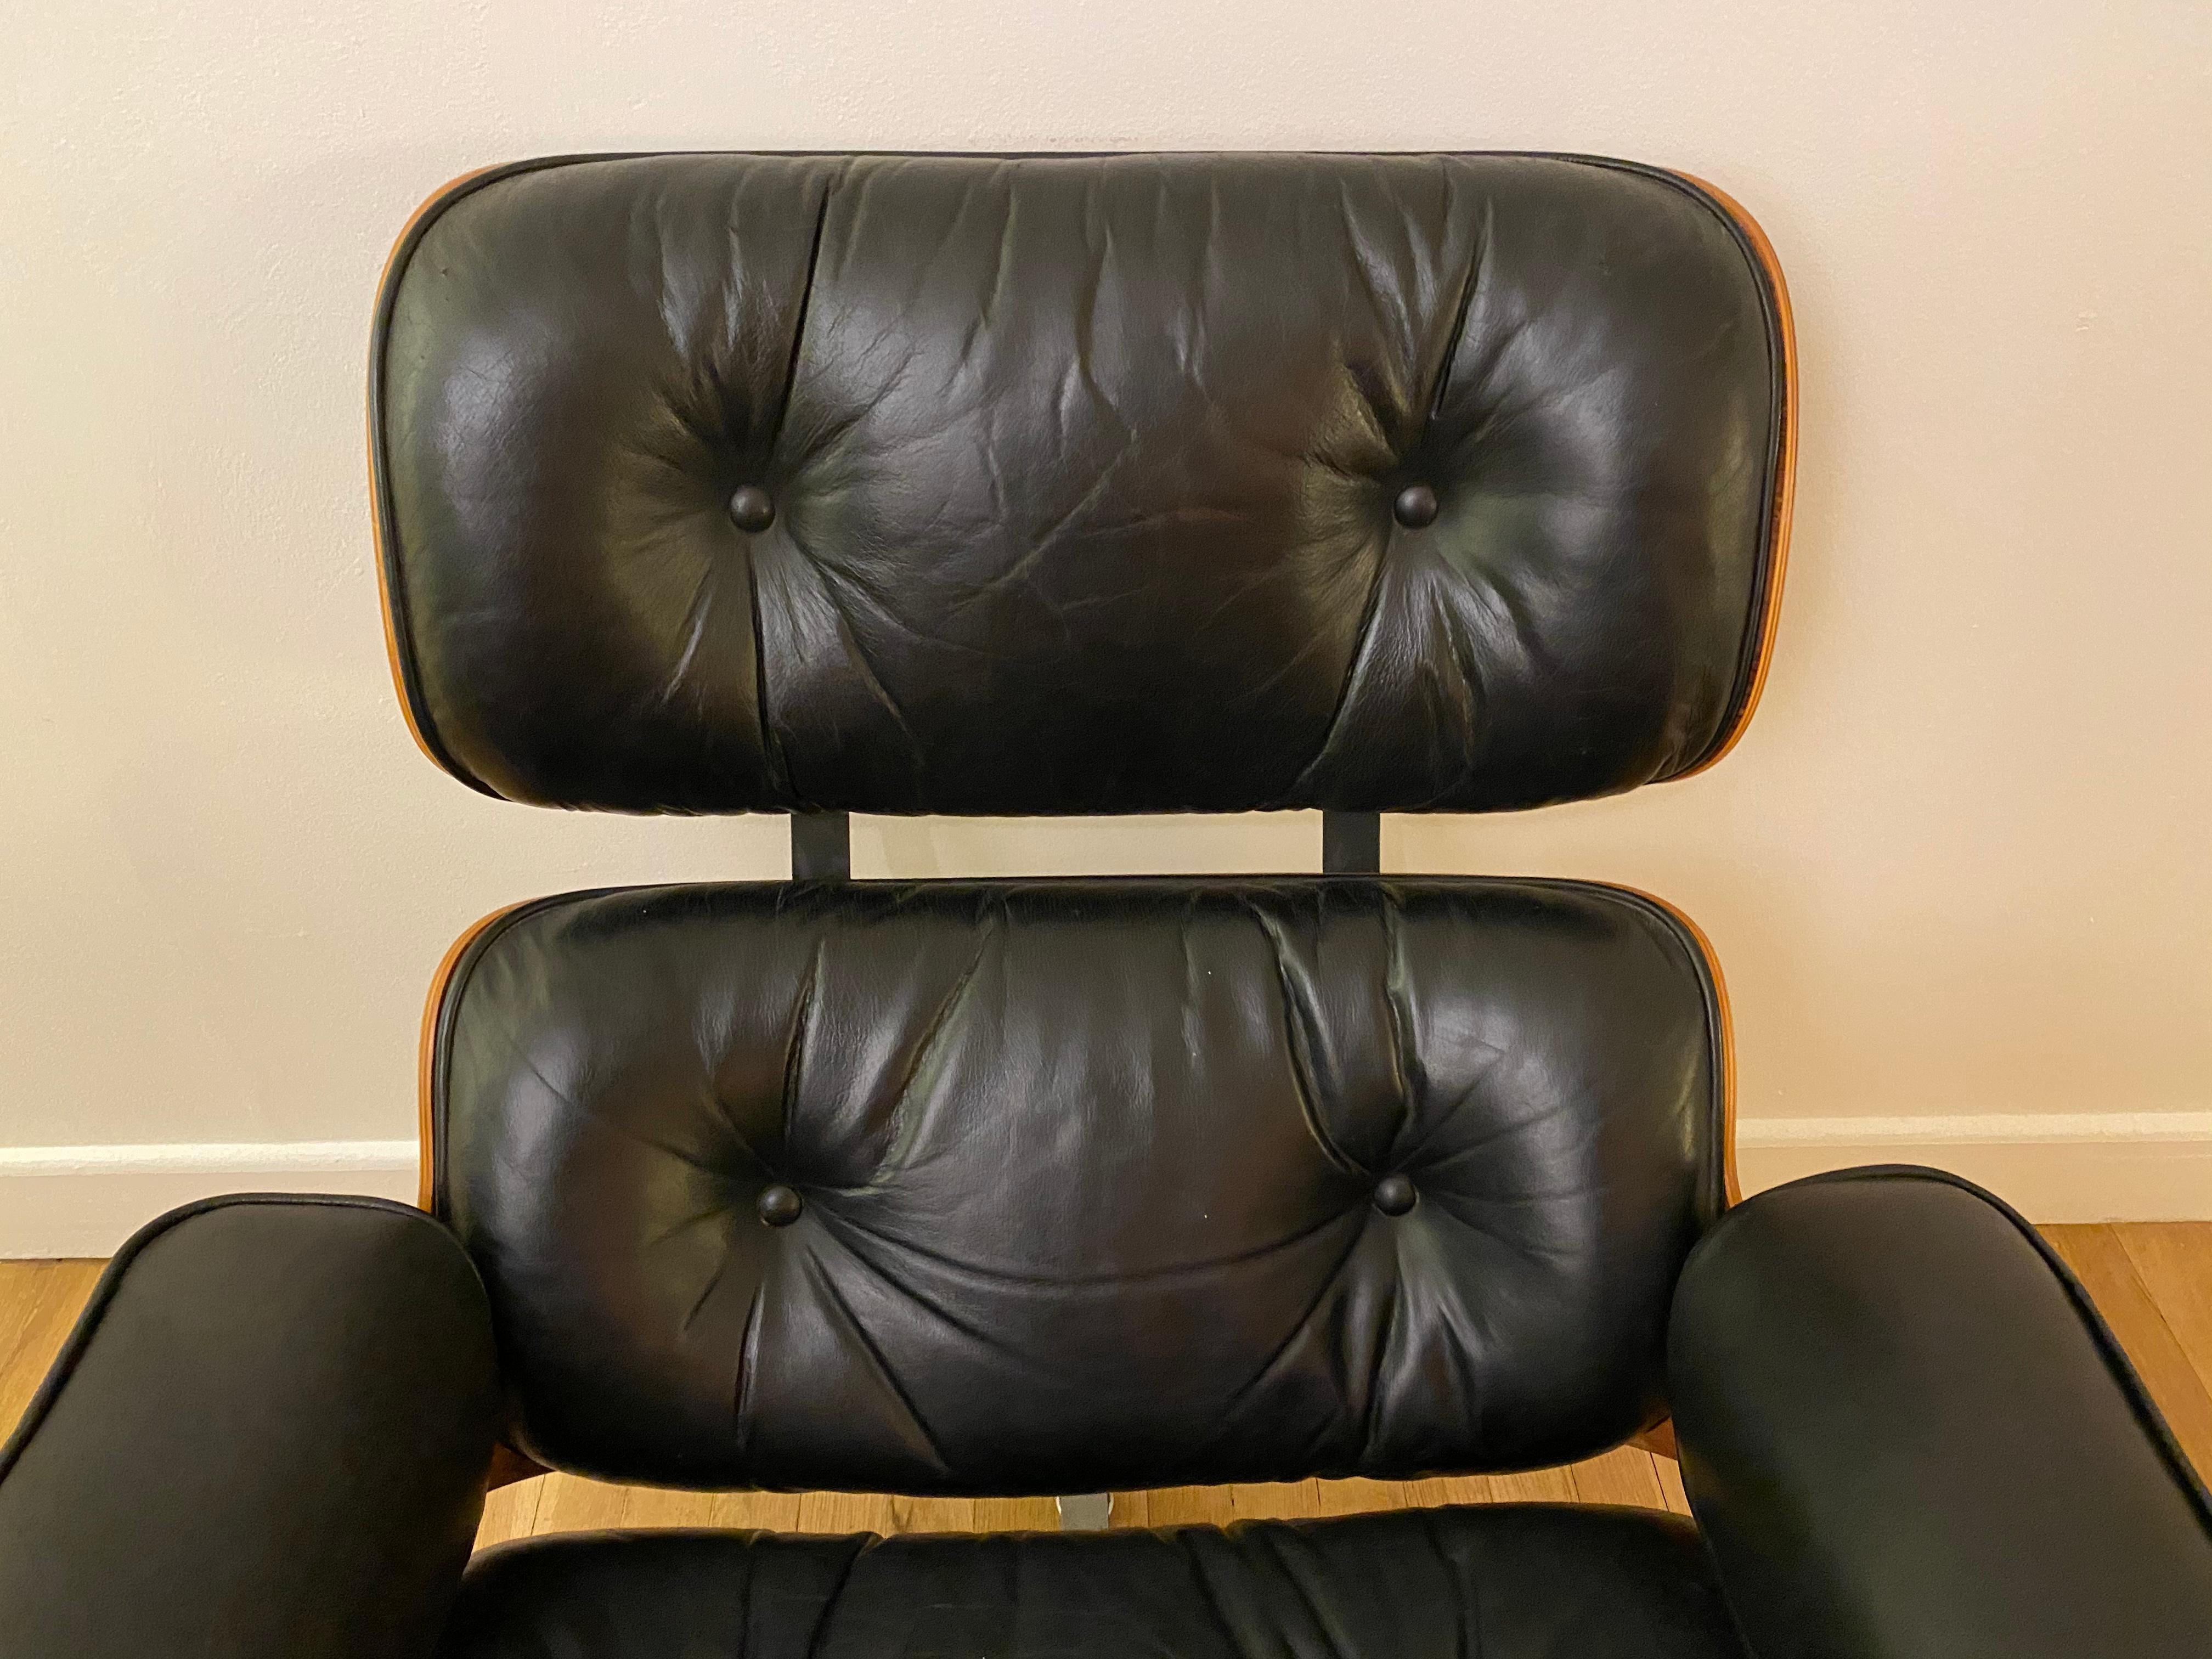 Classic Eames lounge chair and ottoman with black leather cushions. Signed and guaranteed authentic. Handsome color and grain texture. Cushions with all buttons intact. No missing parts. New shock mounts professionally installed. Adjustable glides